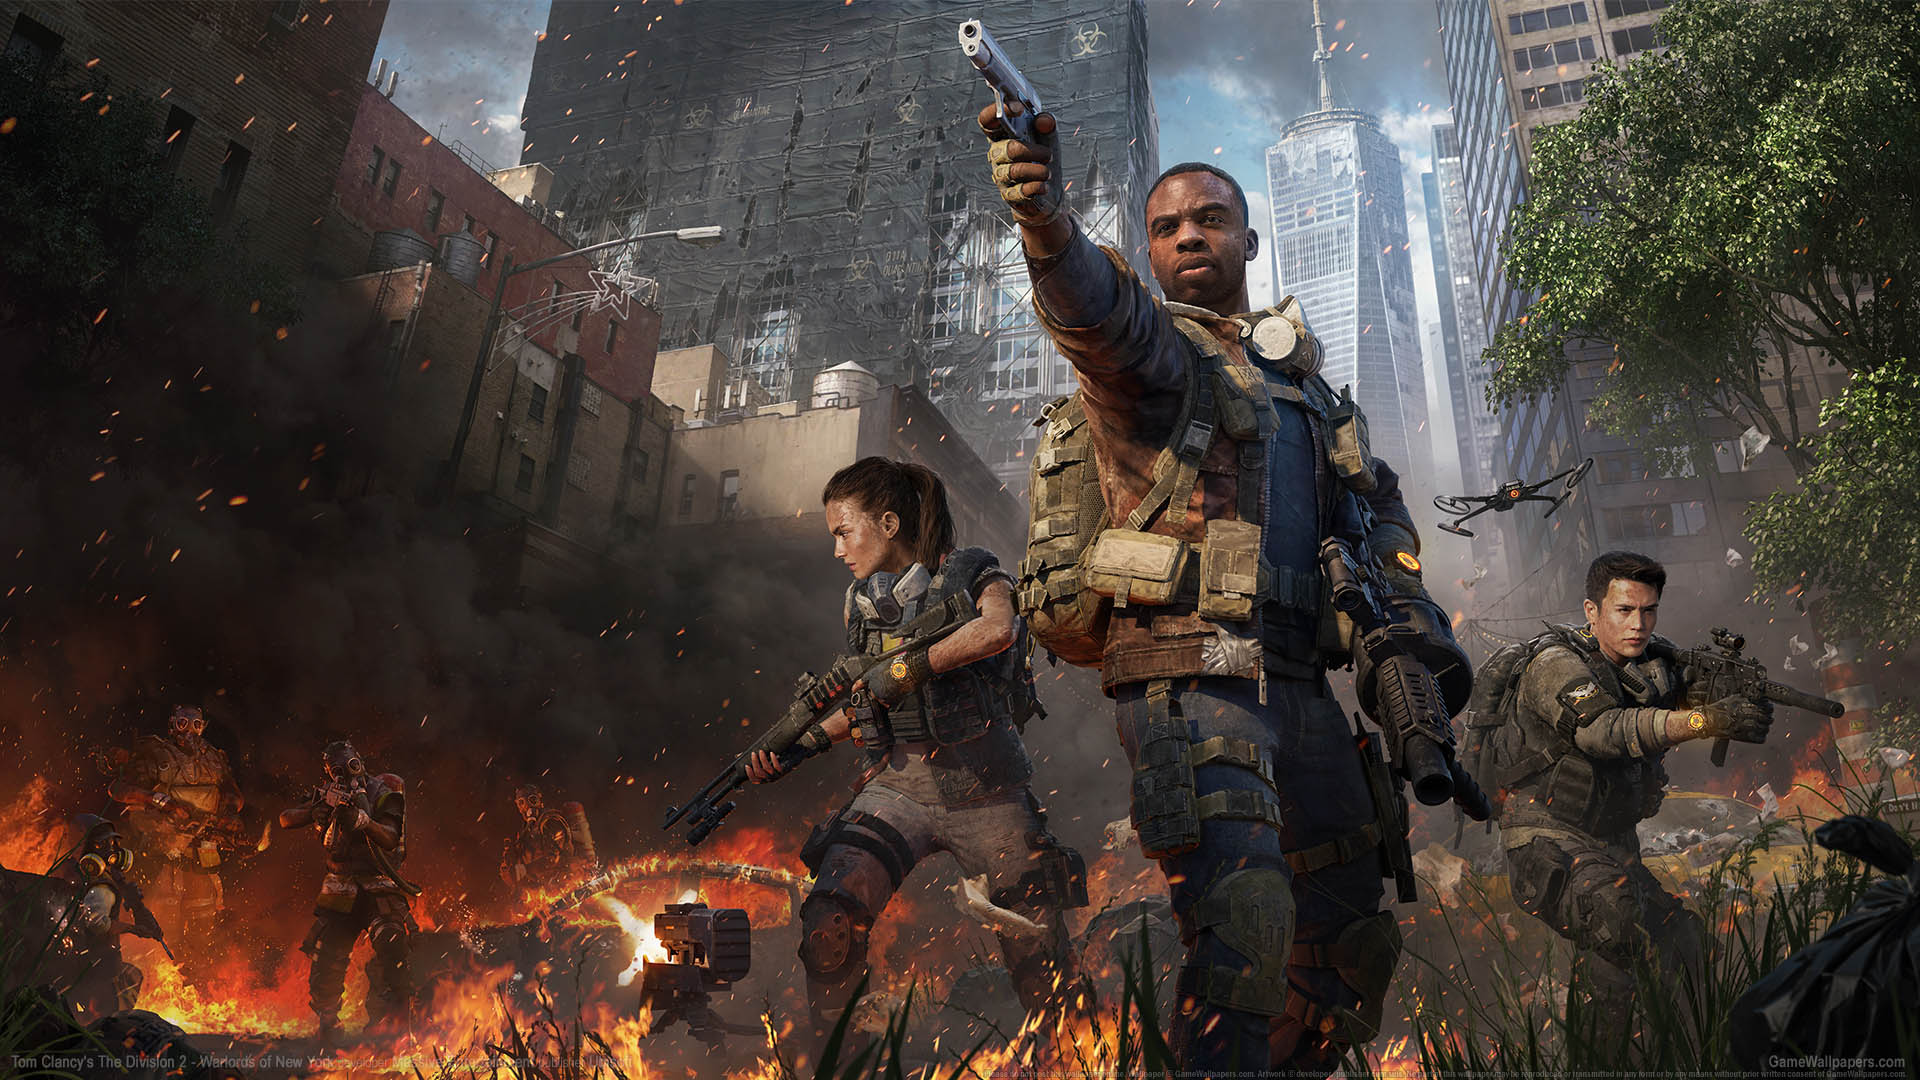 Tom Clancy's The Division 2 - Warlords of New York wallpaper 02 1920x1080